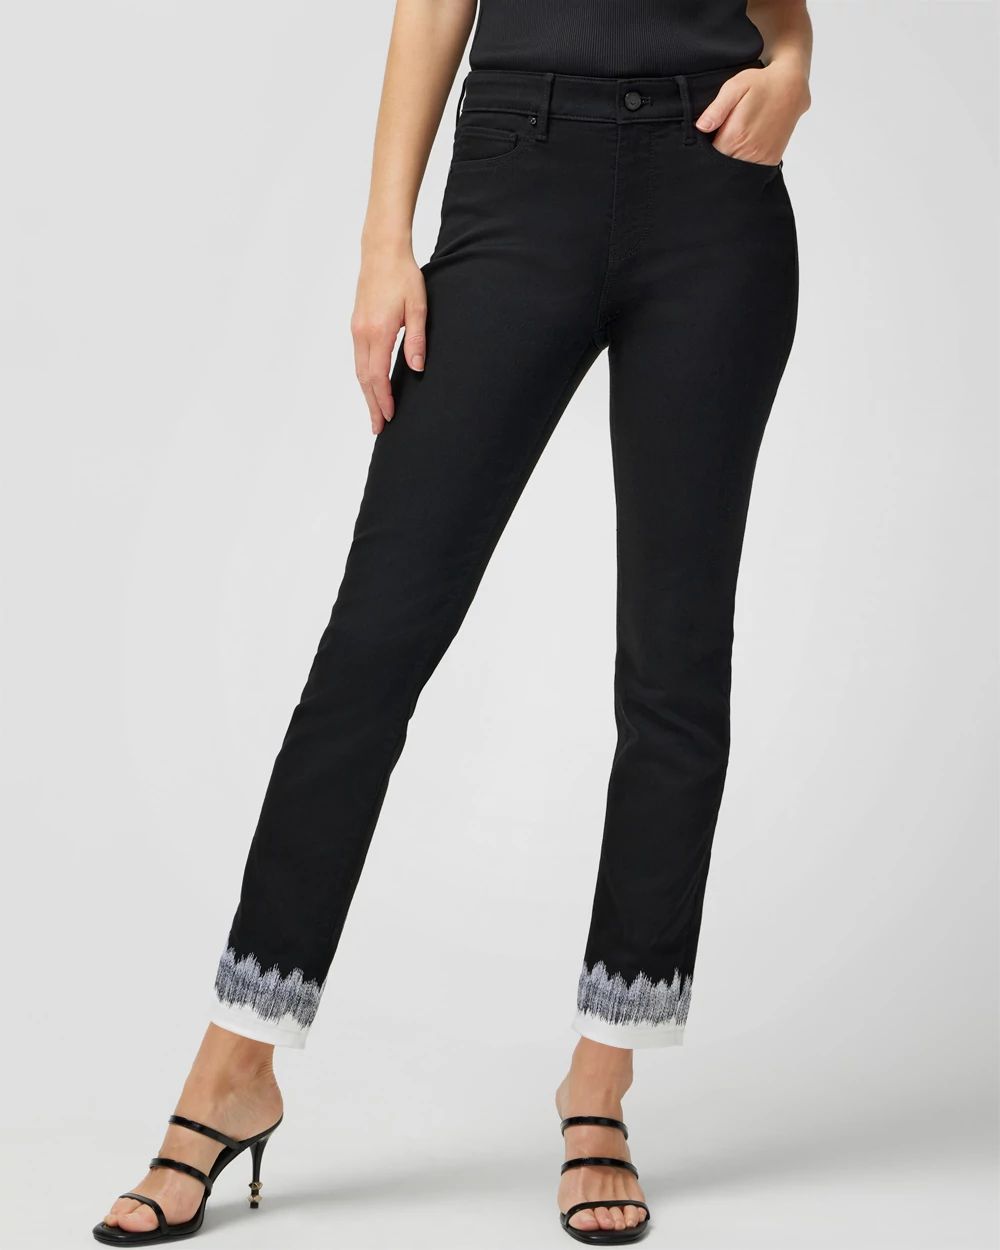 Petite High-Rise Embroidered Cuff Slim Crop Jeans click to view larger image.